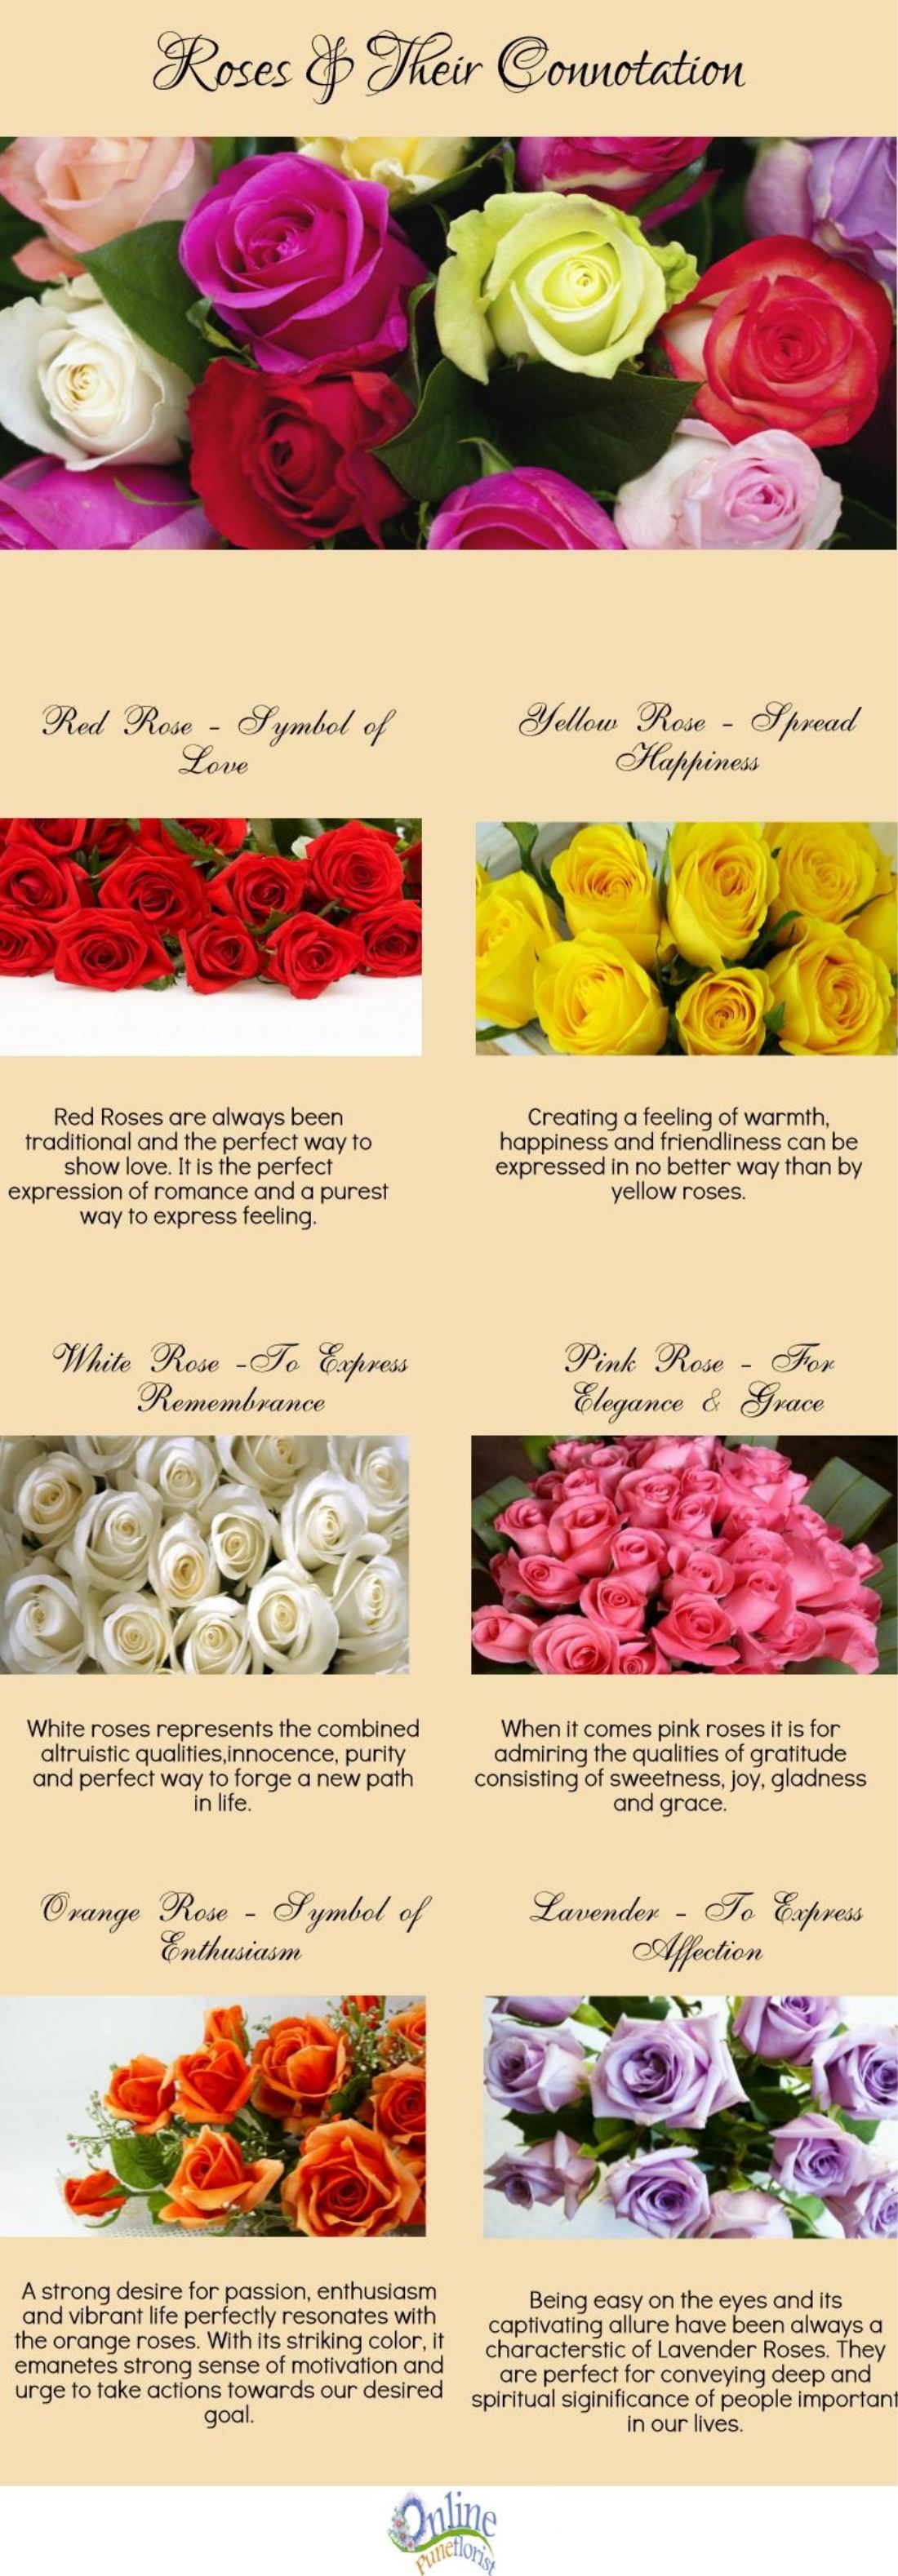 roses and its connotation